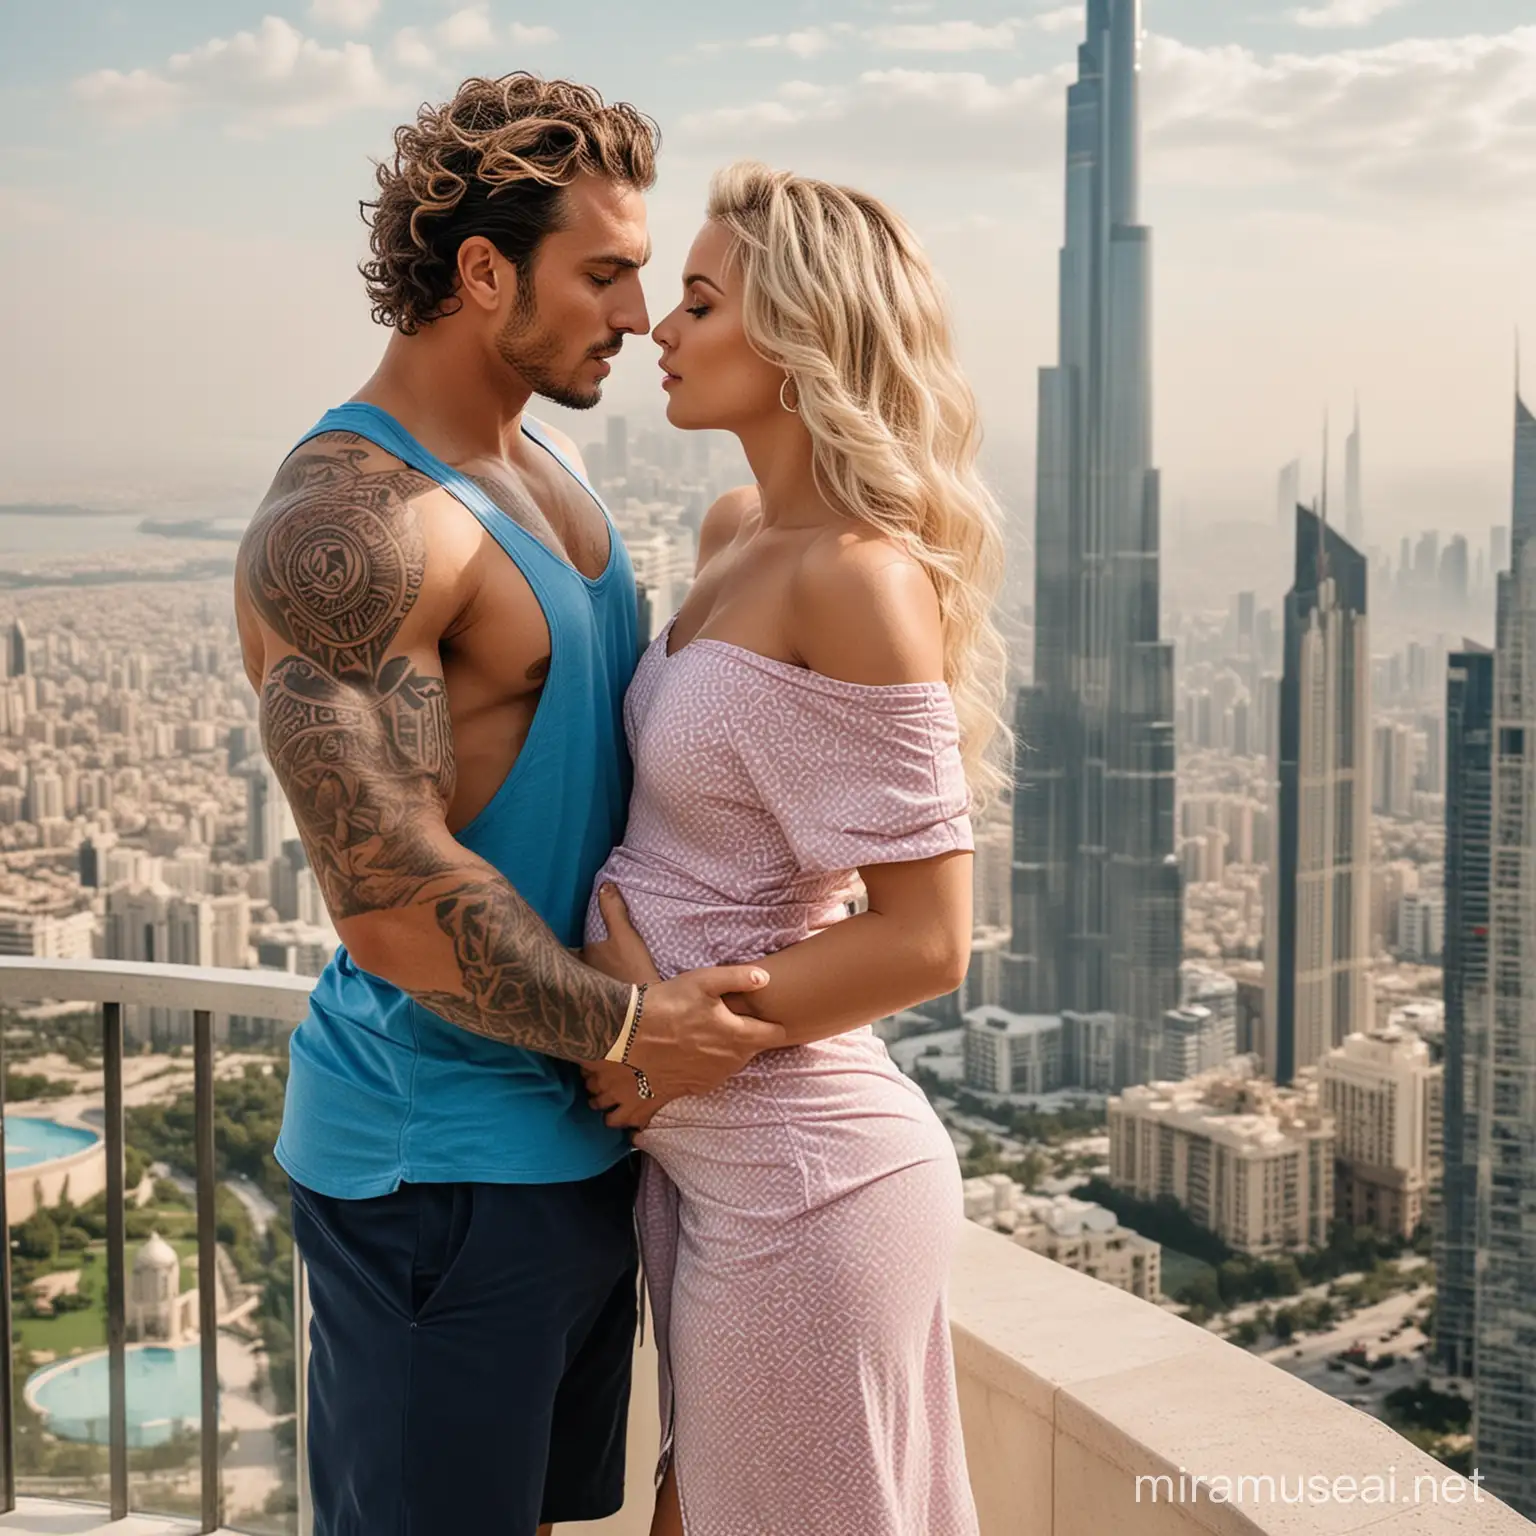 Talented Football Star Kisses Pregnant Royalty Wife in Luxurious Mountain Villa Overlooking Skyscraper